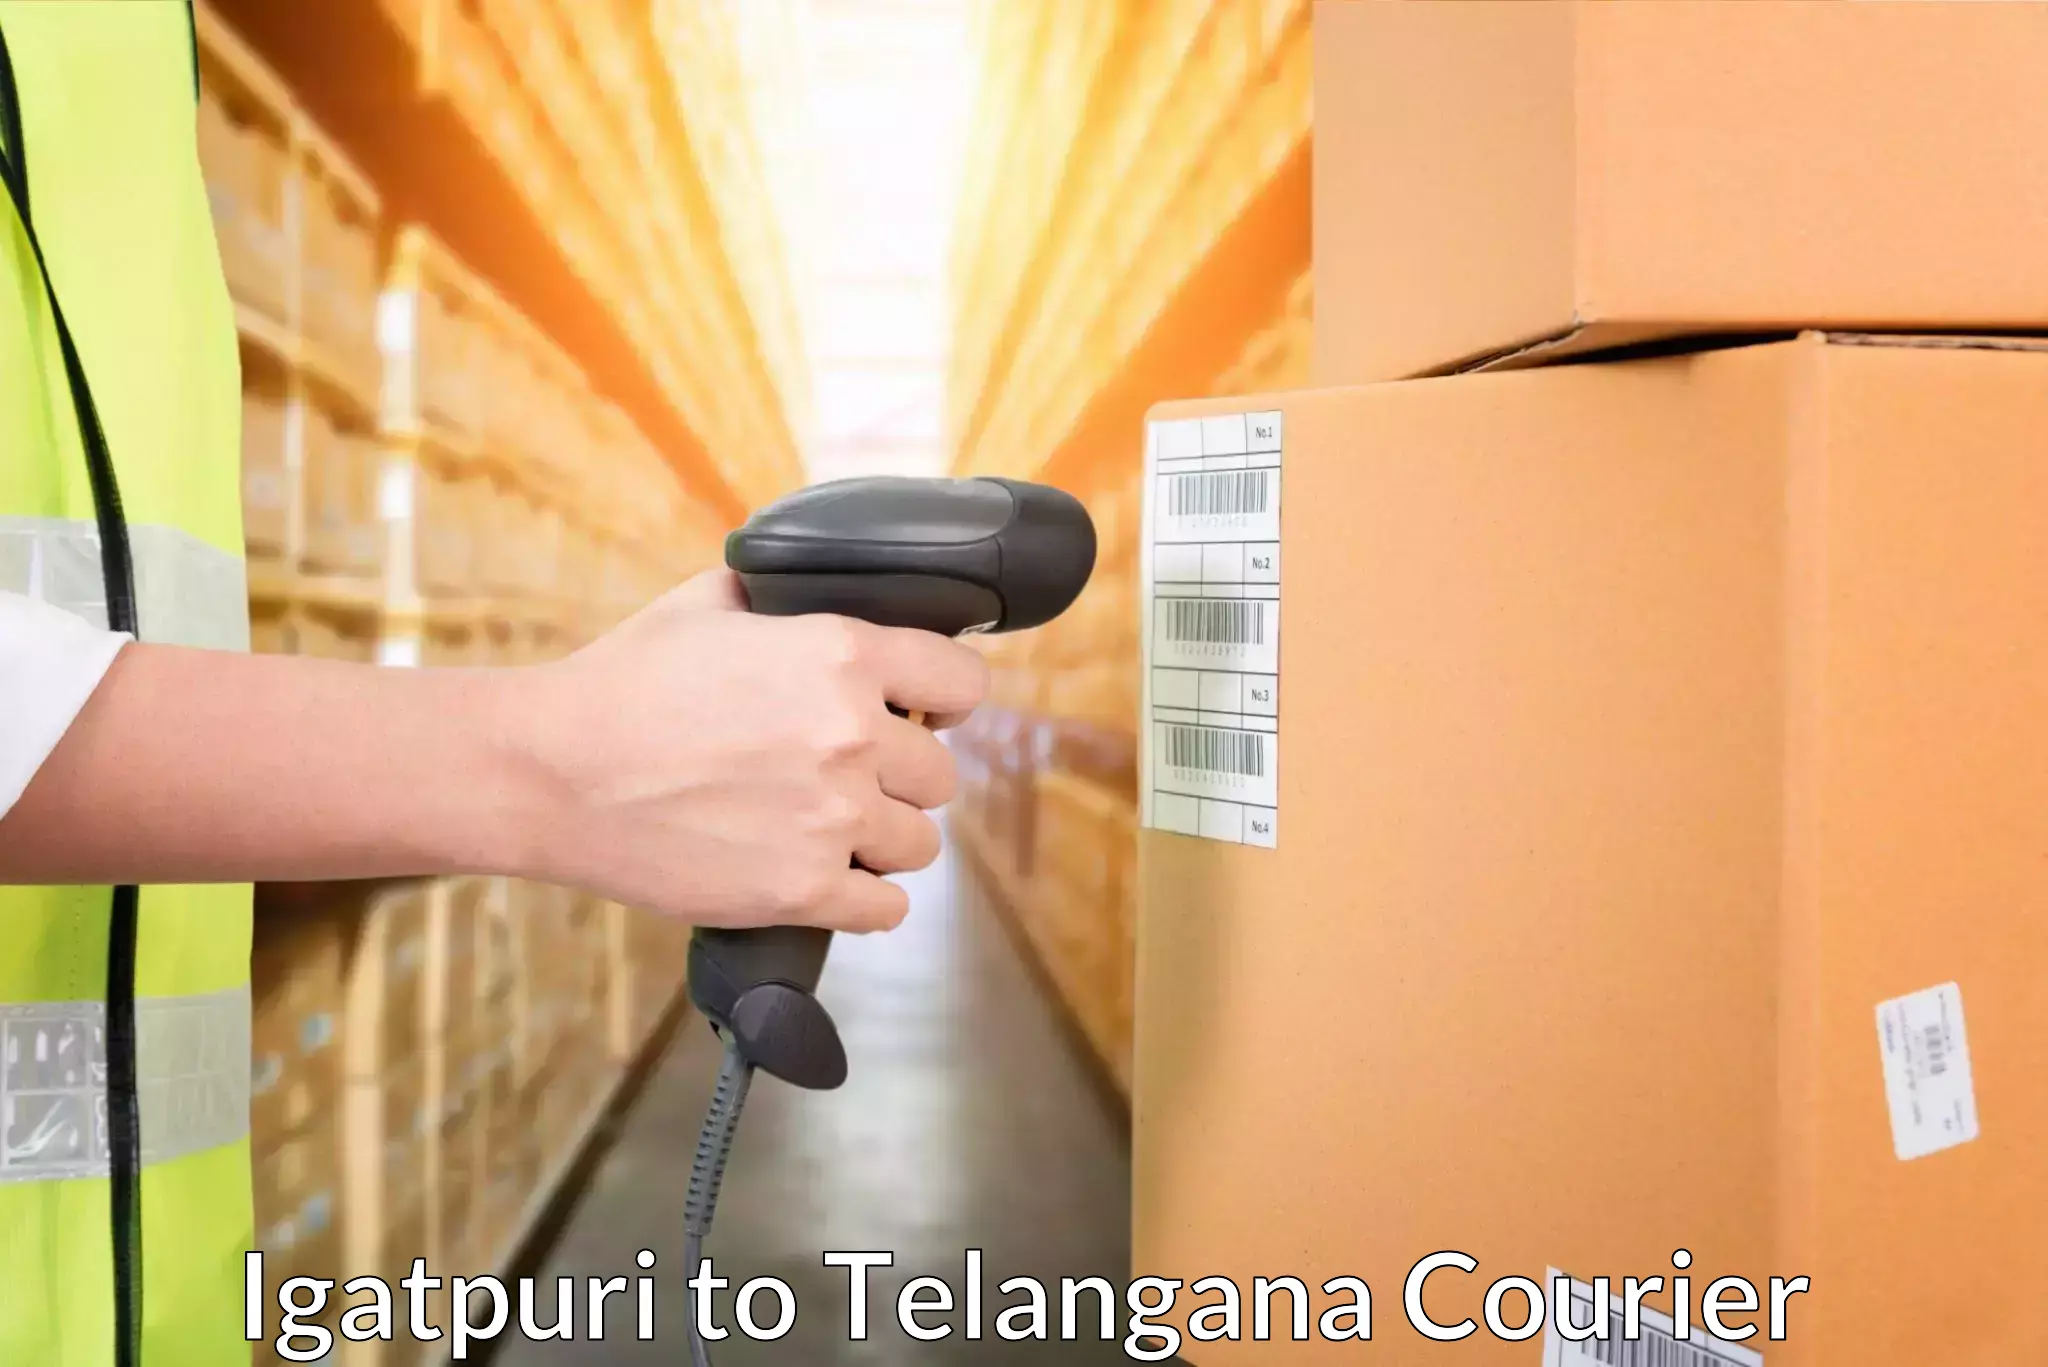 Courier service booking in Igatpuri to Vemulawada